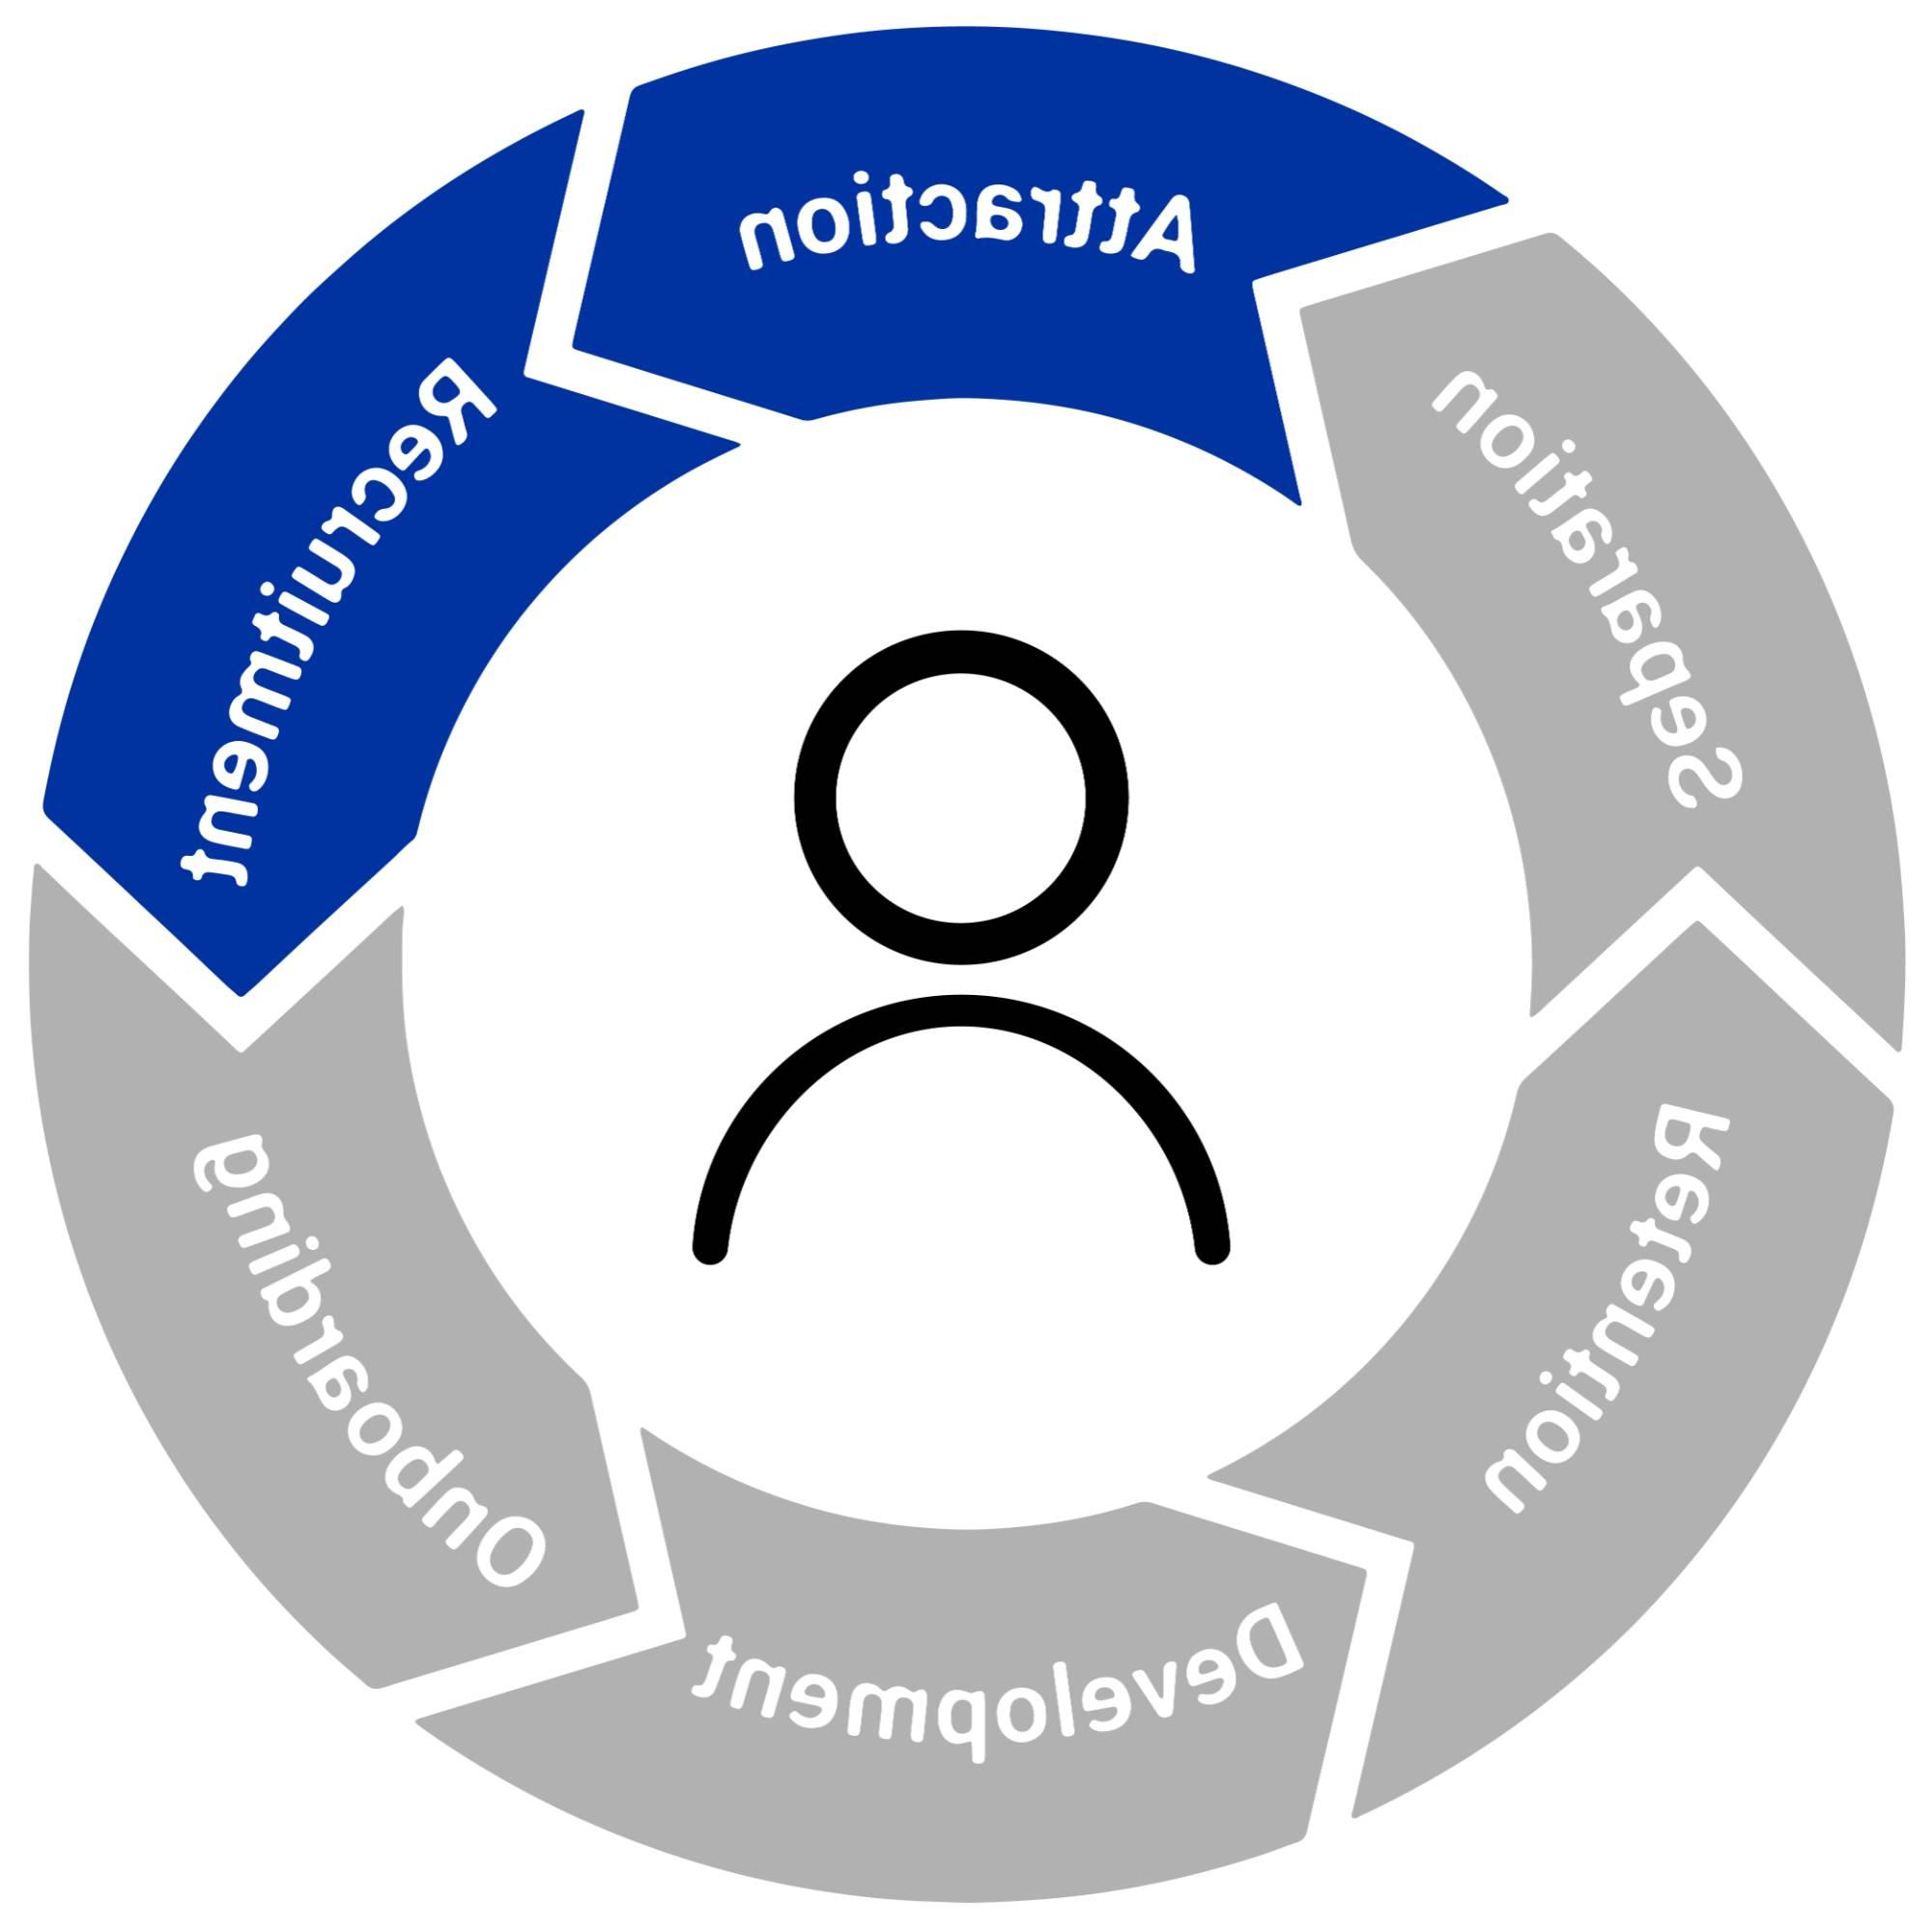 Employee Lifecycle, with "Attraction" and "Recruitment" highlighted